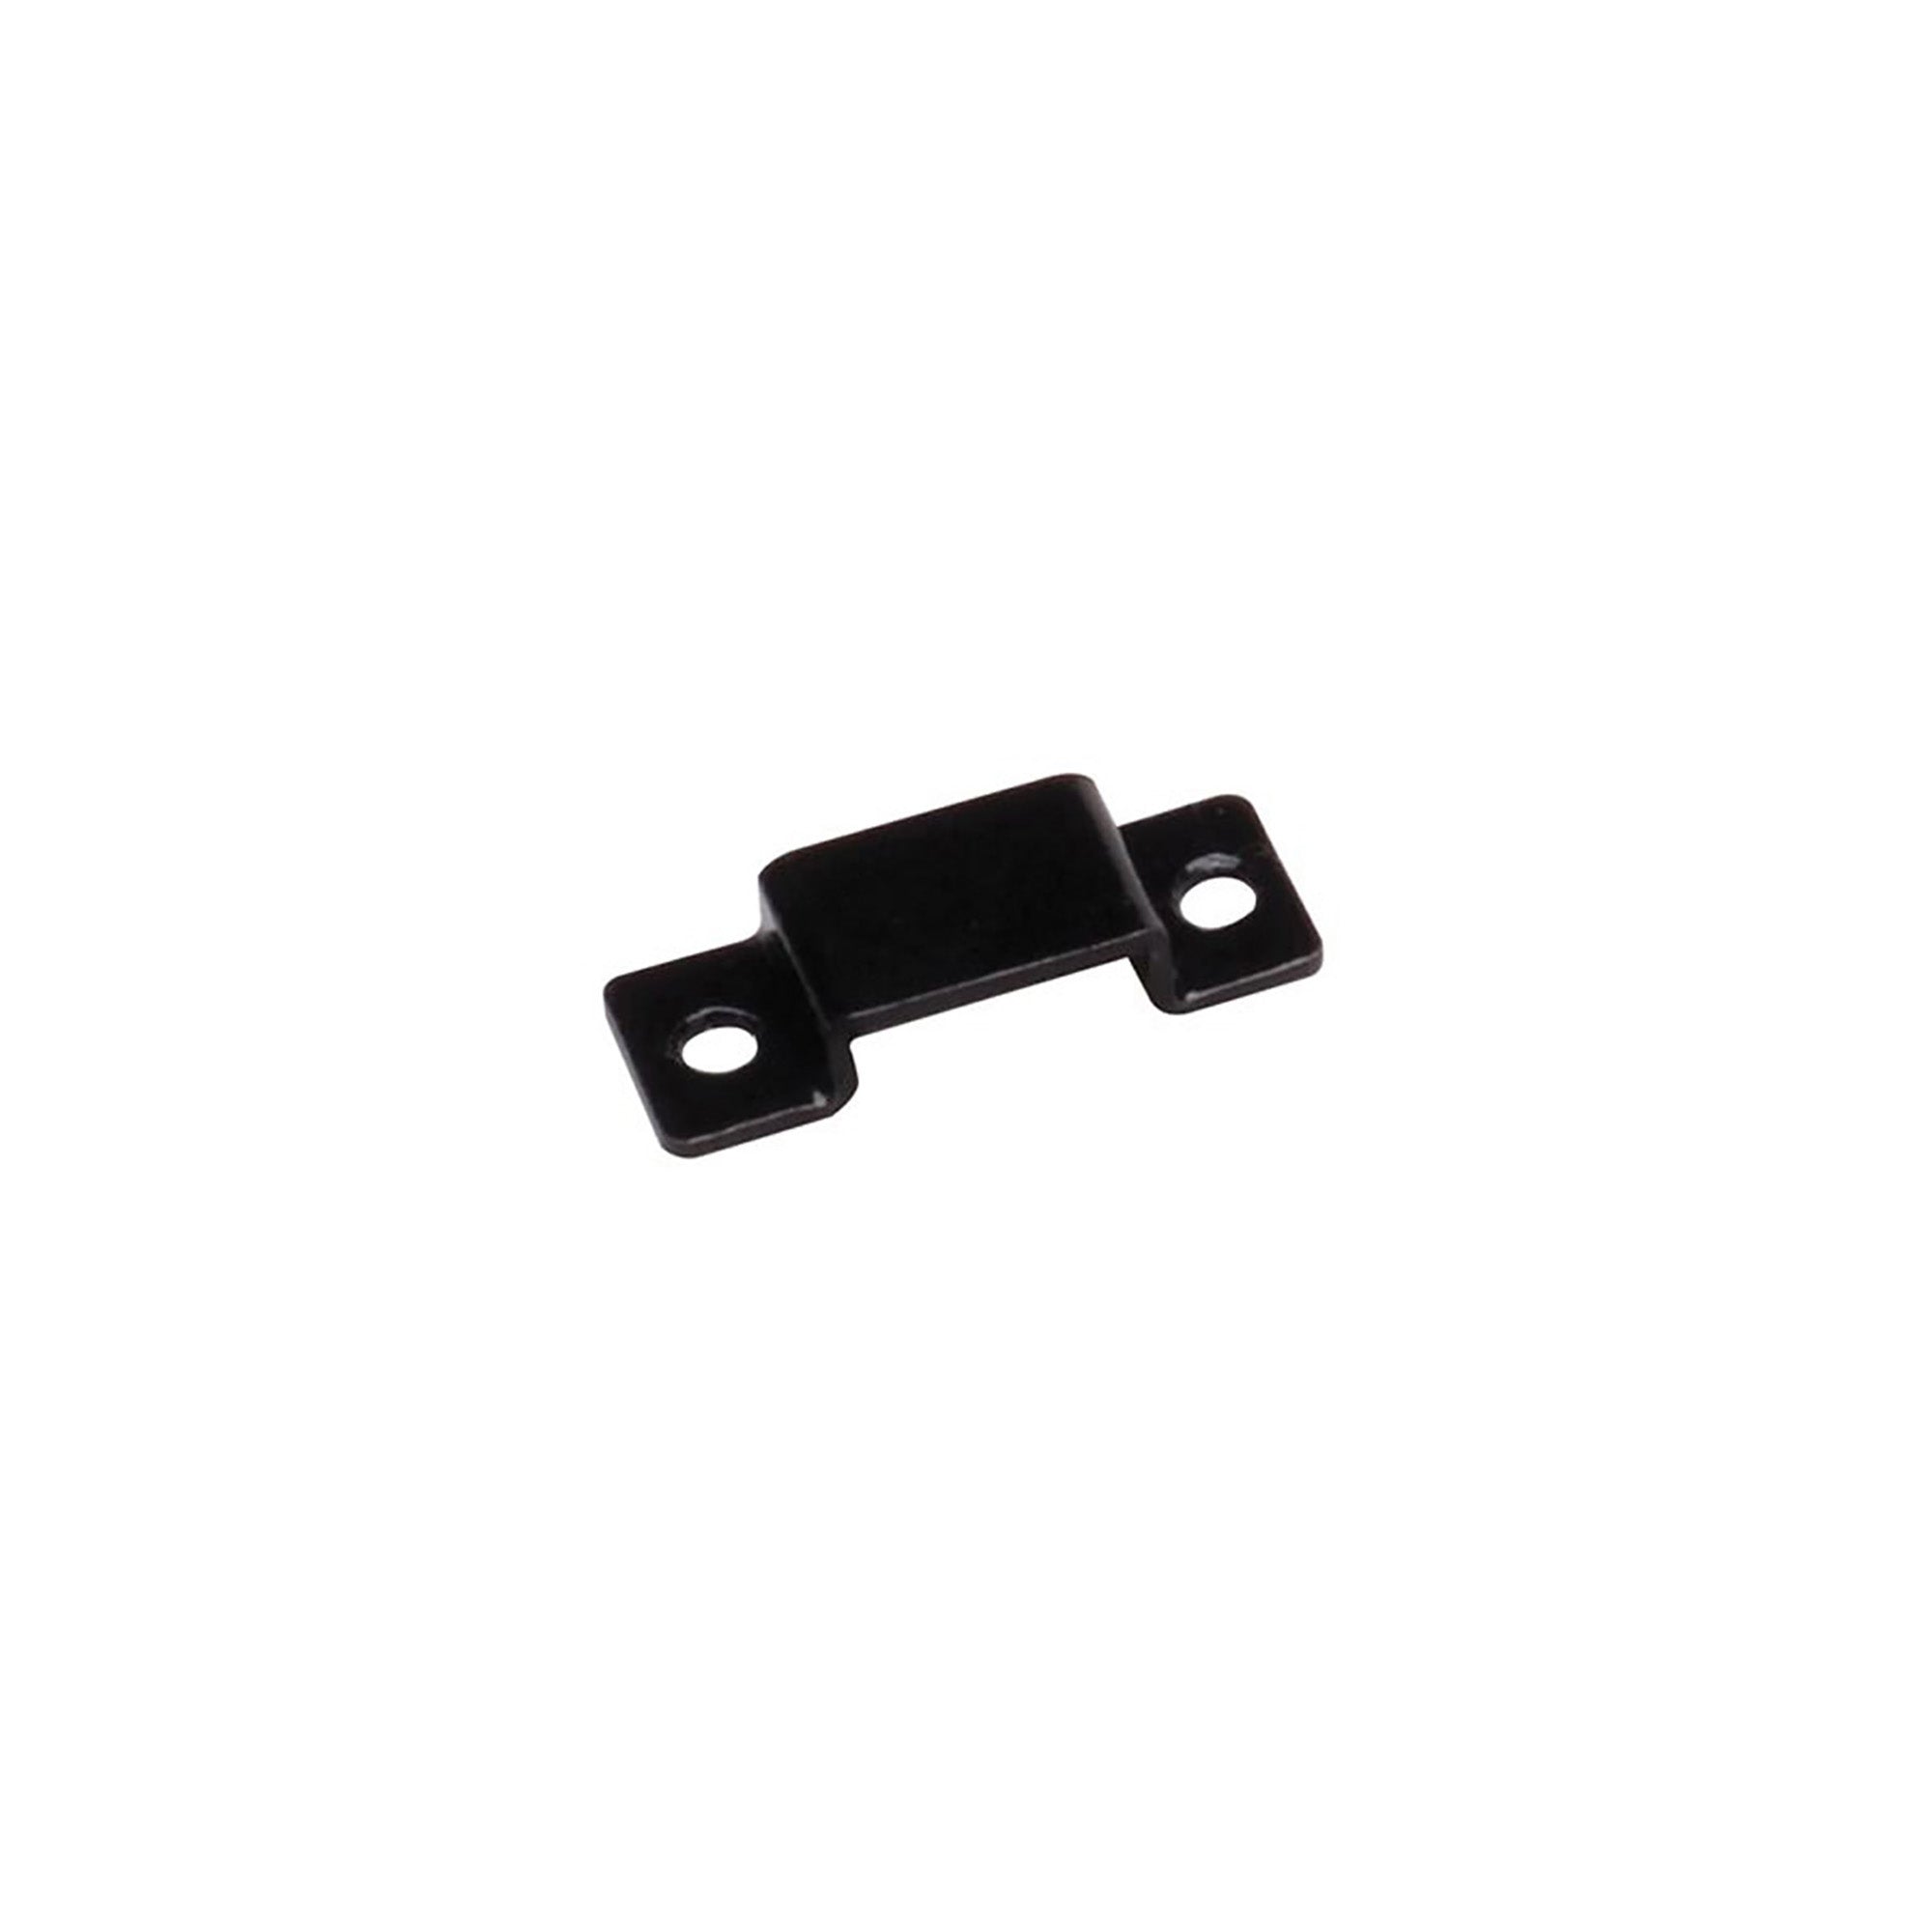 Double Screw Mounting Clip for 24V Outdoor PRO or RGB Strip Light